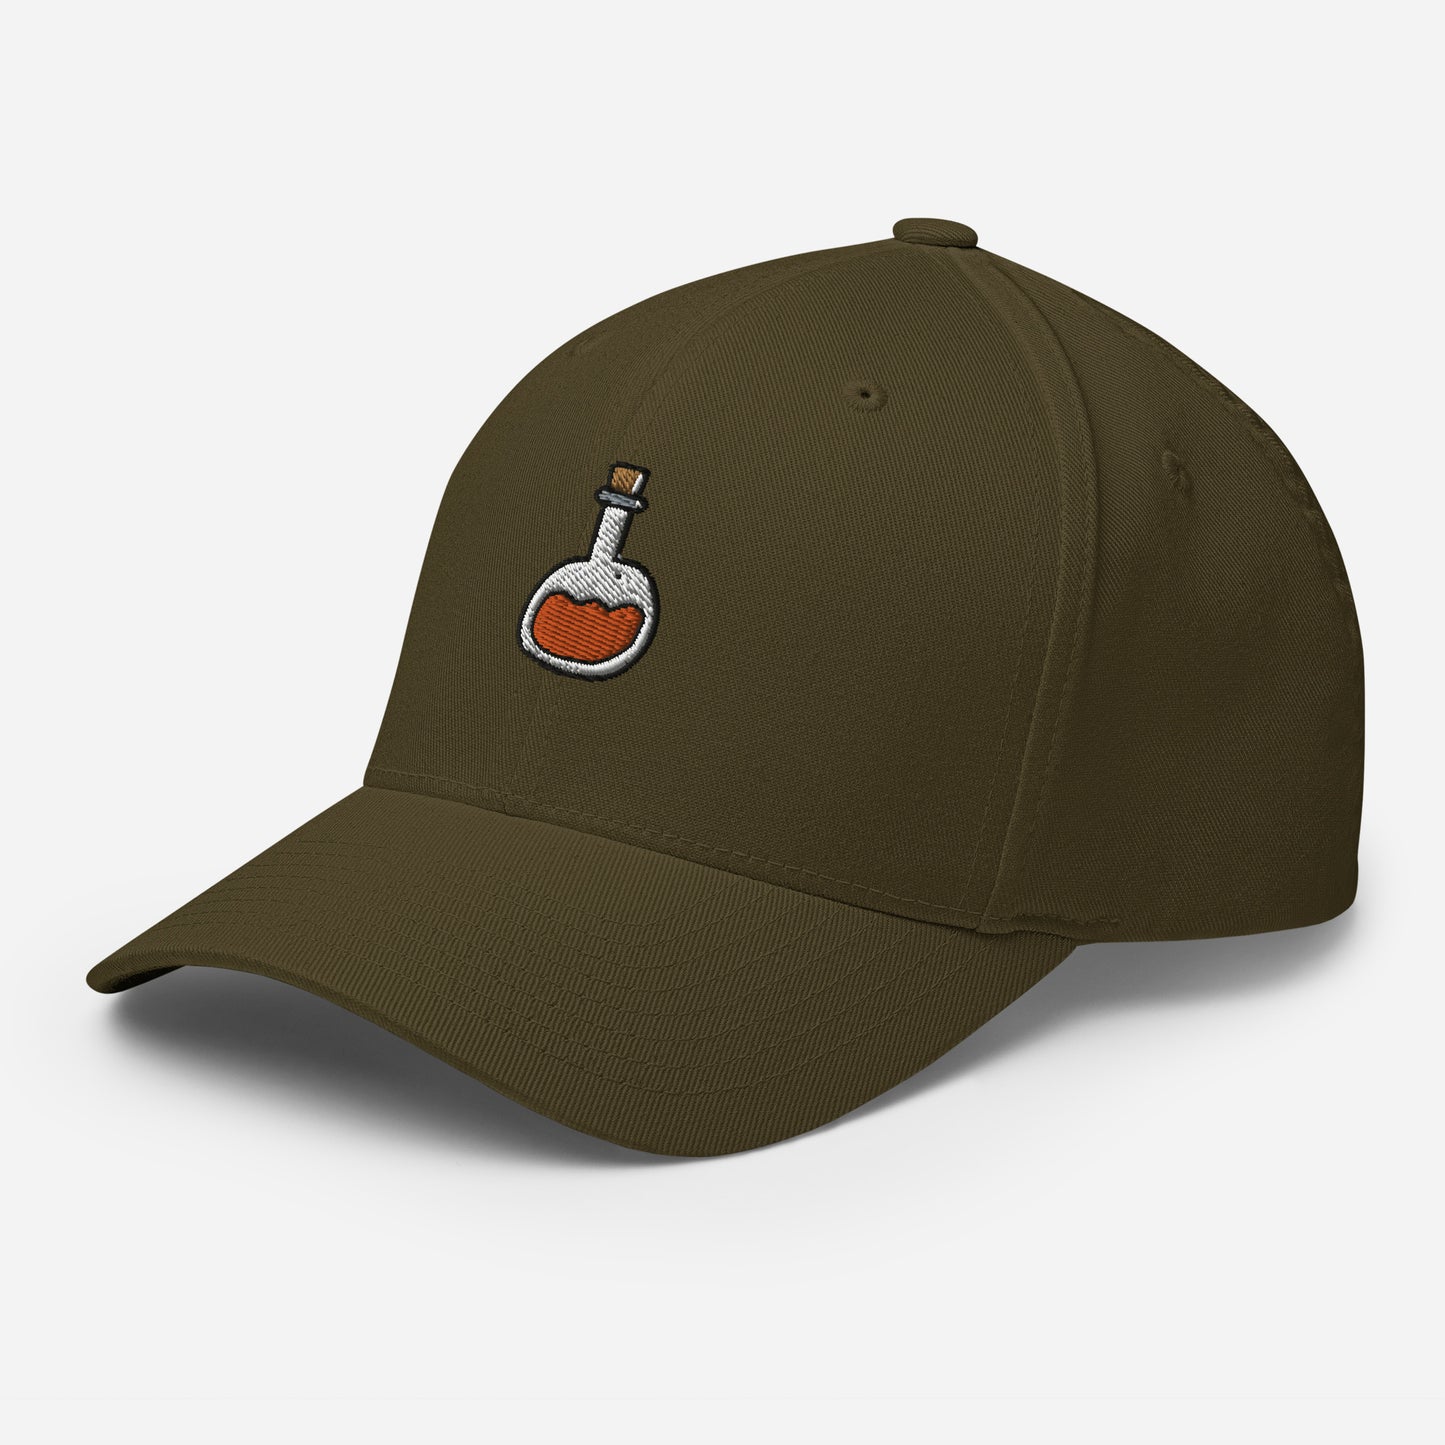 cap-from-the-front-with-fantasy-symbol